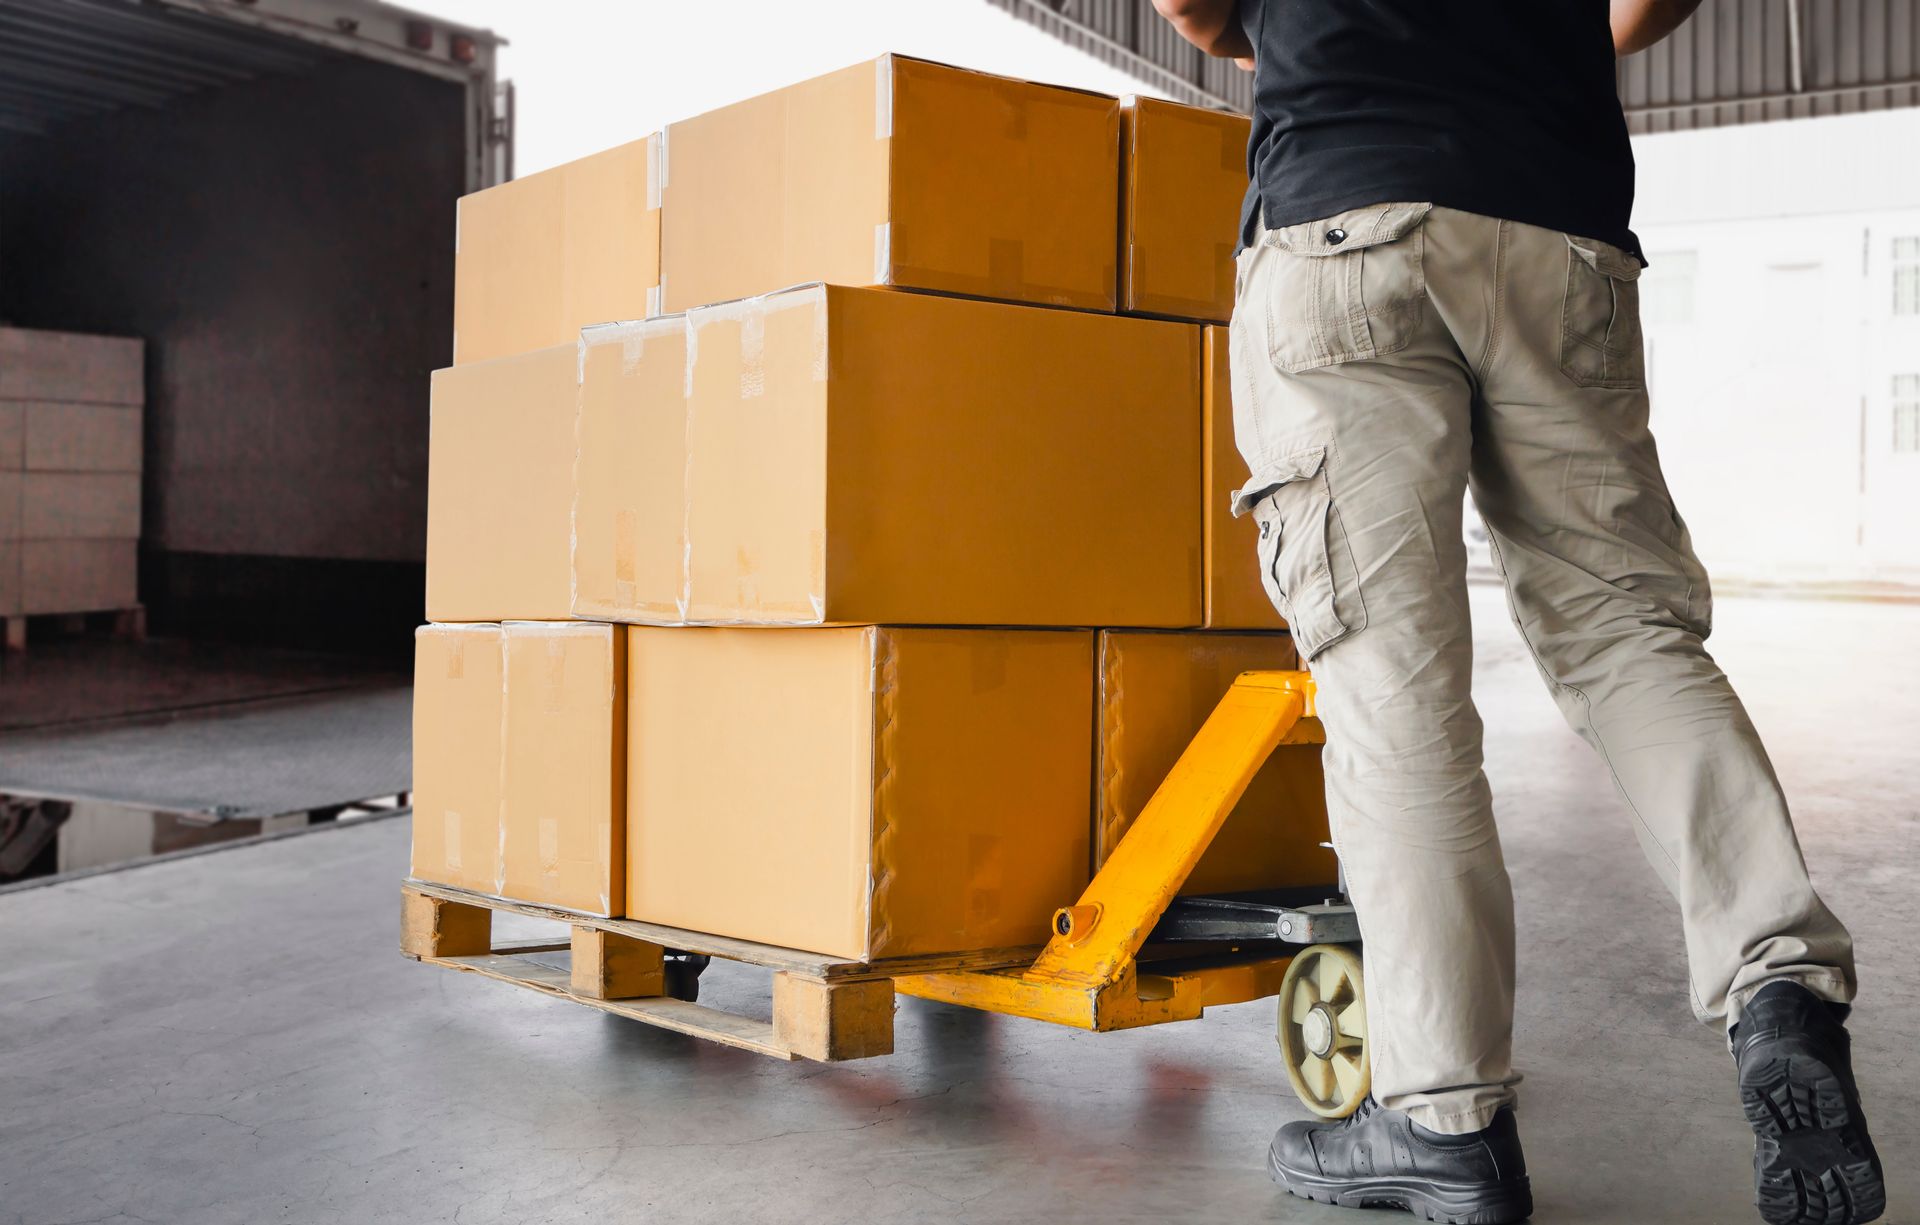 a man is pushing a properly loaded pallet with boxes on it in a warehouse.